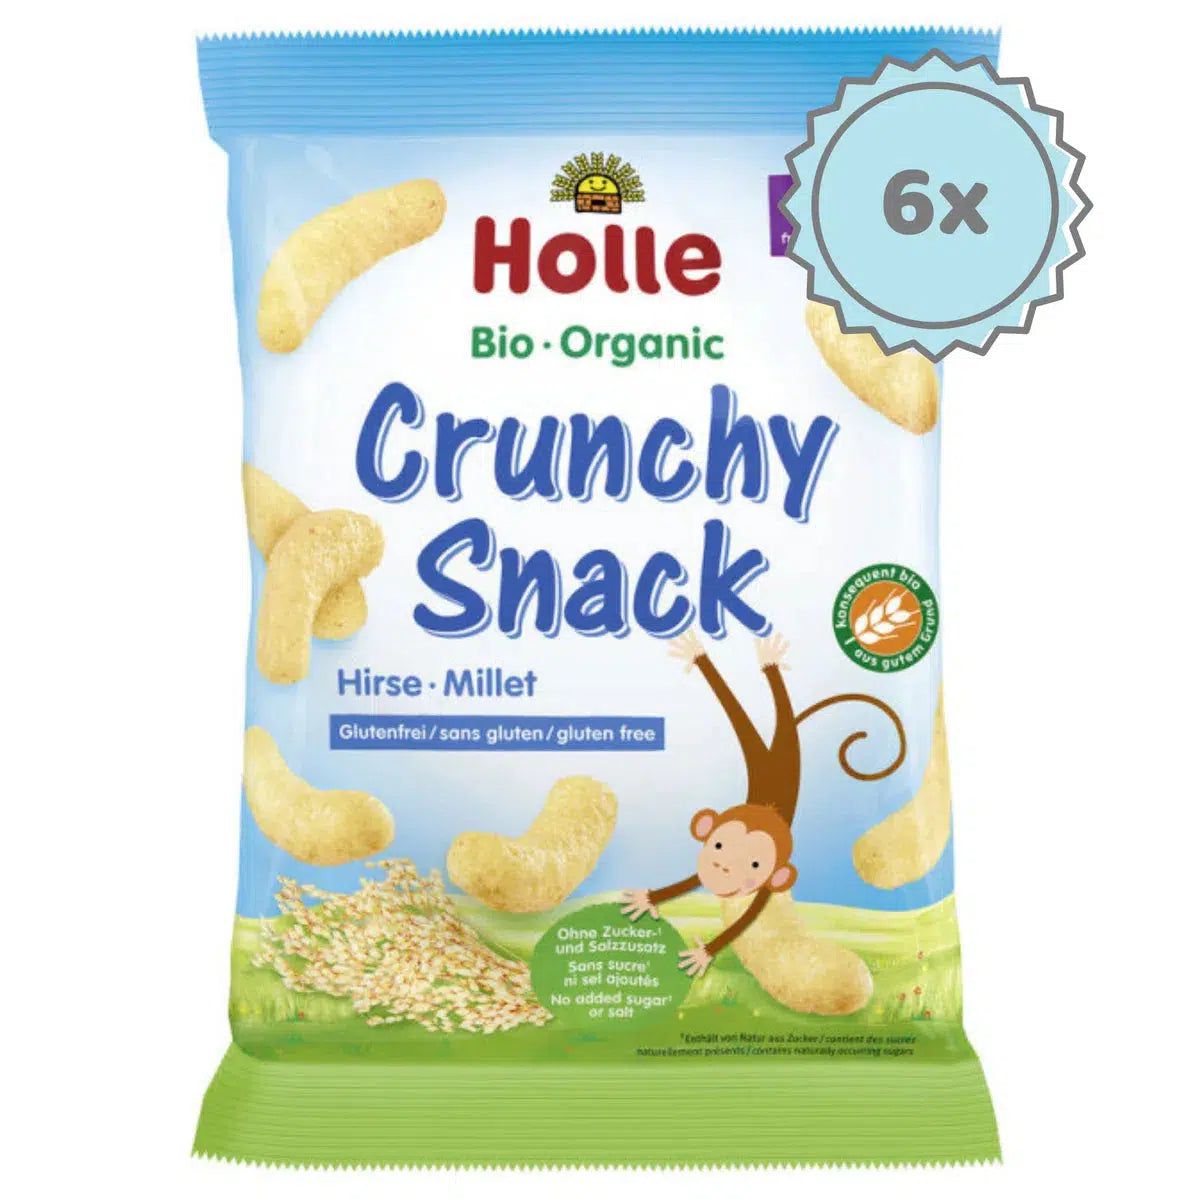 Holle Snack - Millet Crunchy Baby Puffs (8+ Months) - 6 Packs | Organic's Best Shop